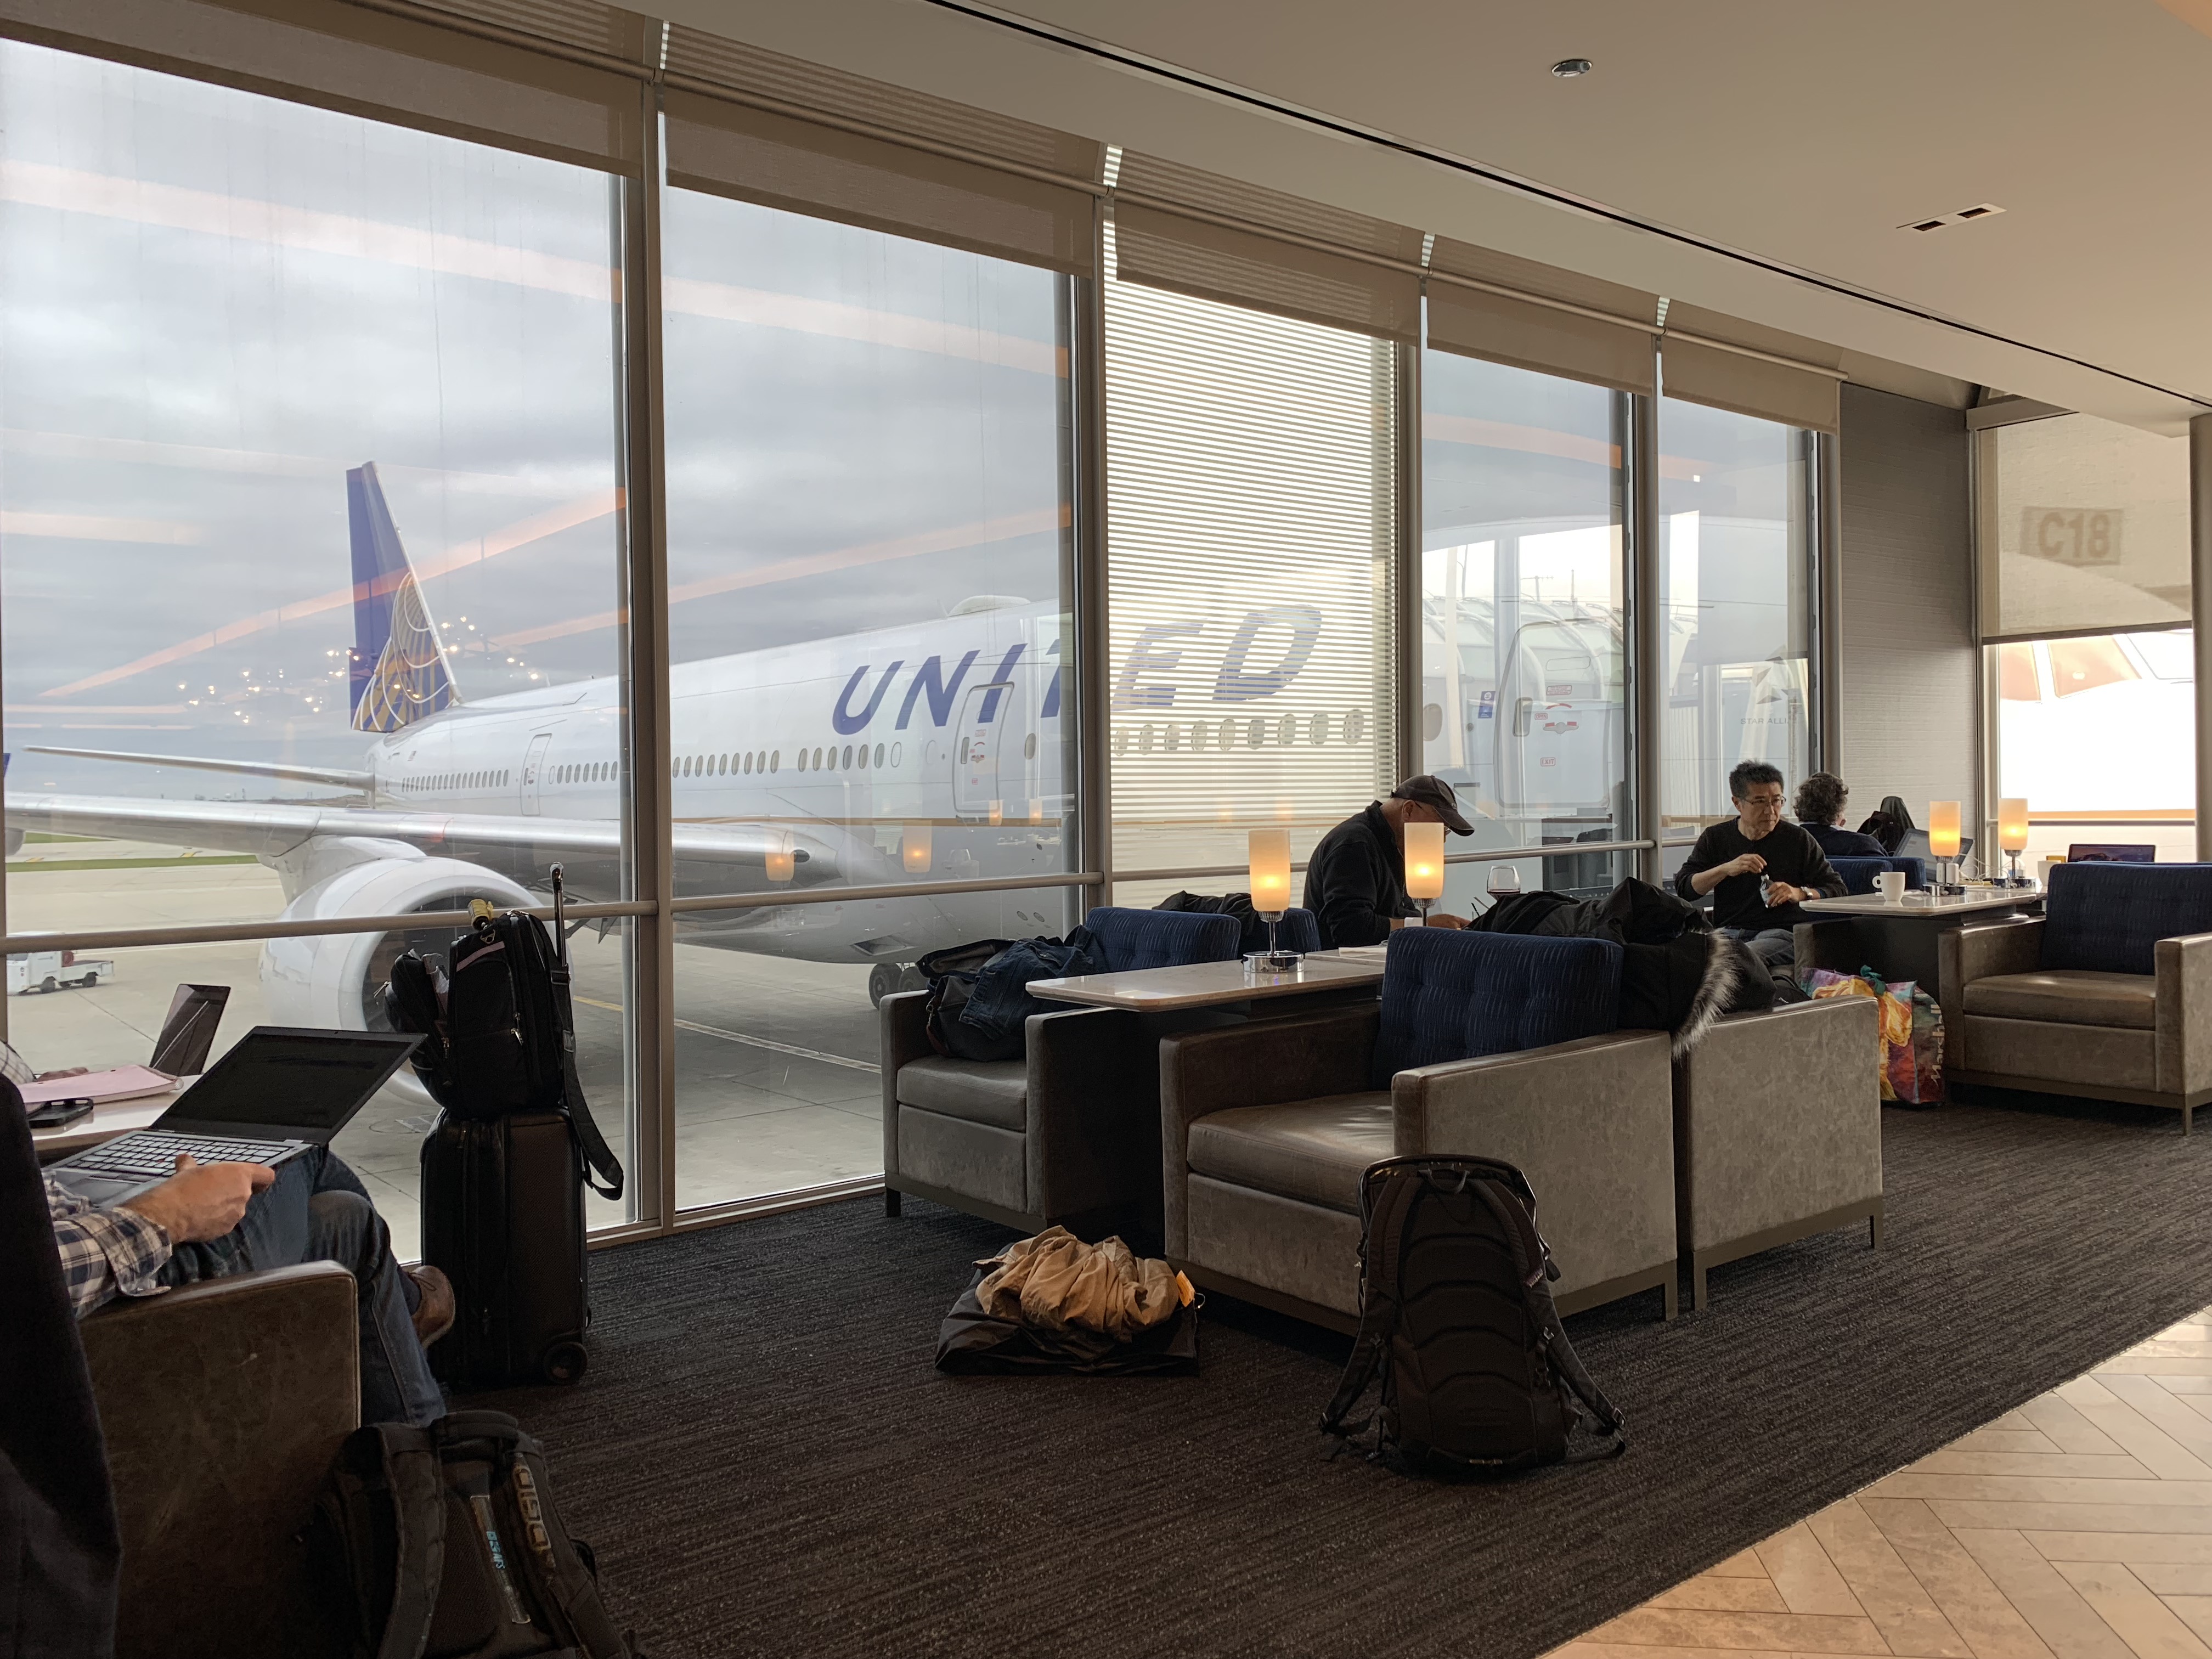 people sitting in a lounge area with a plane in the background